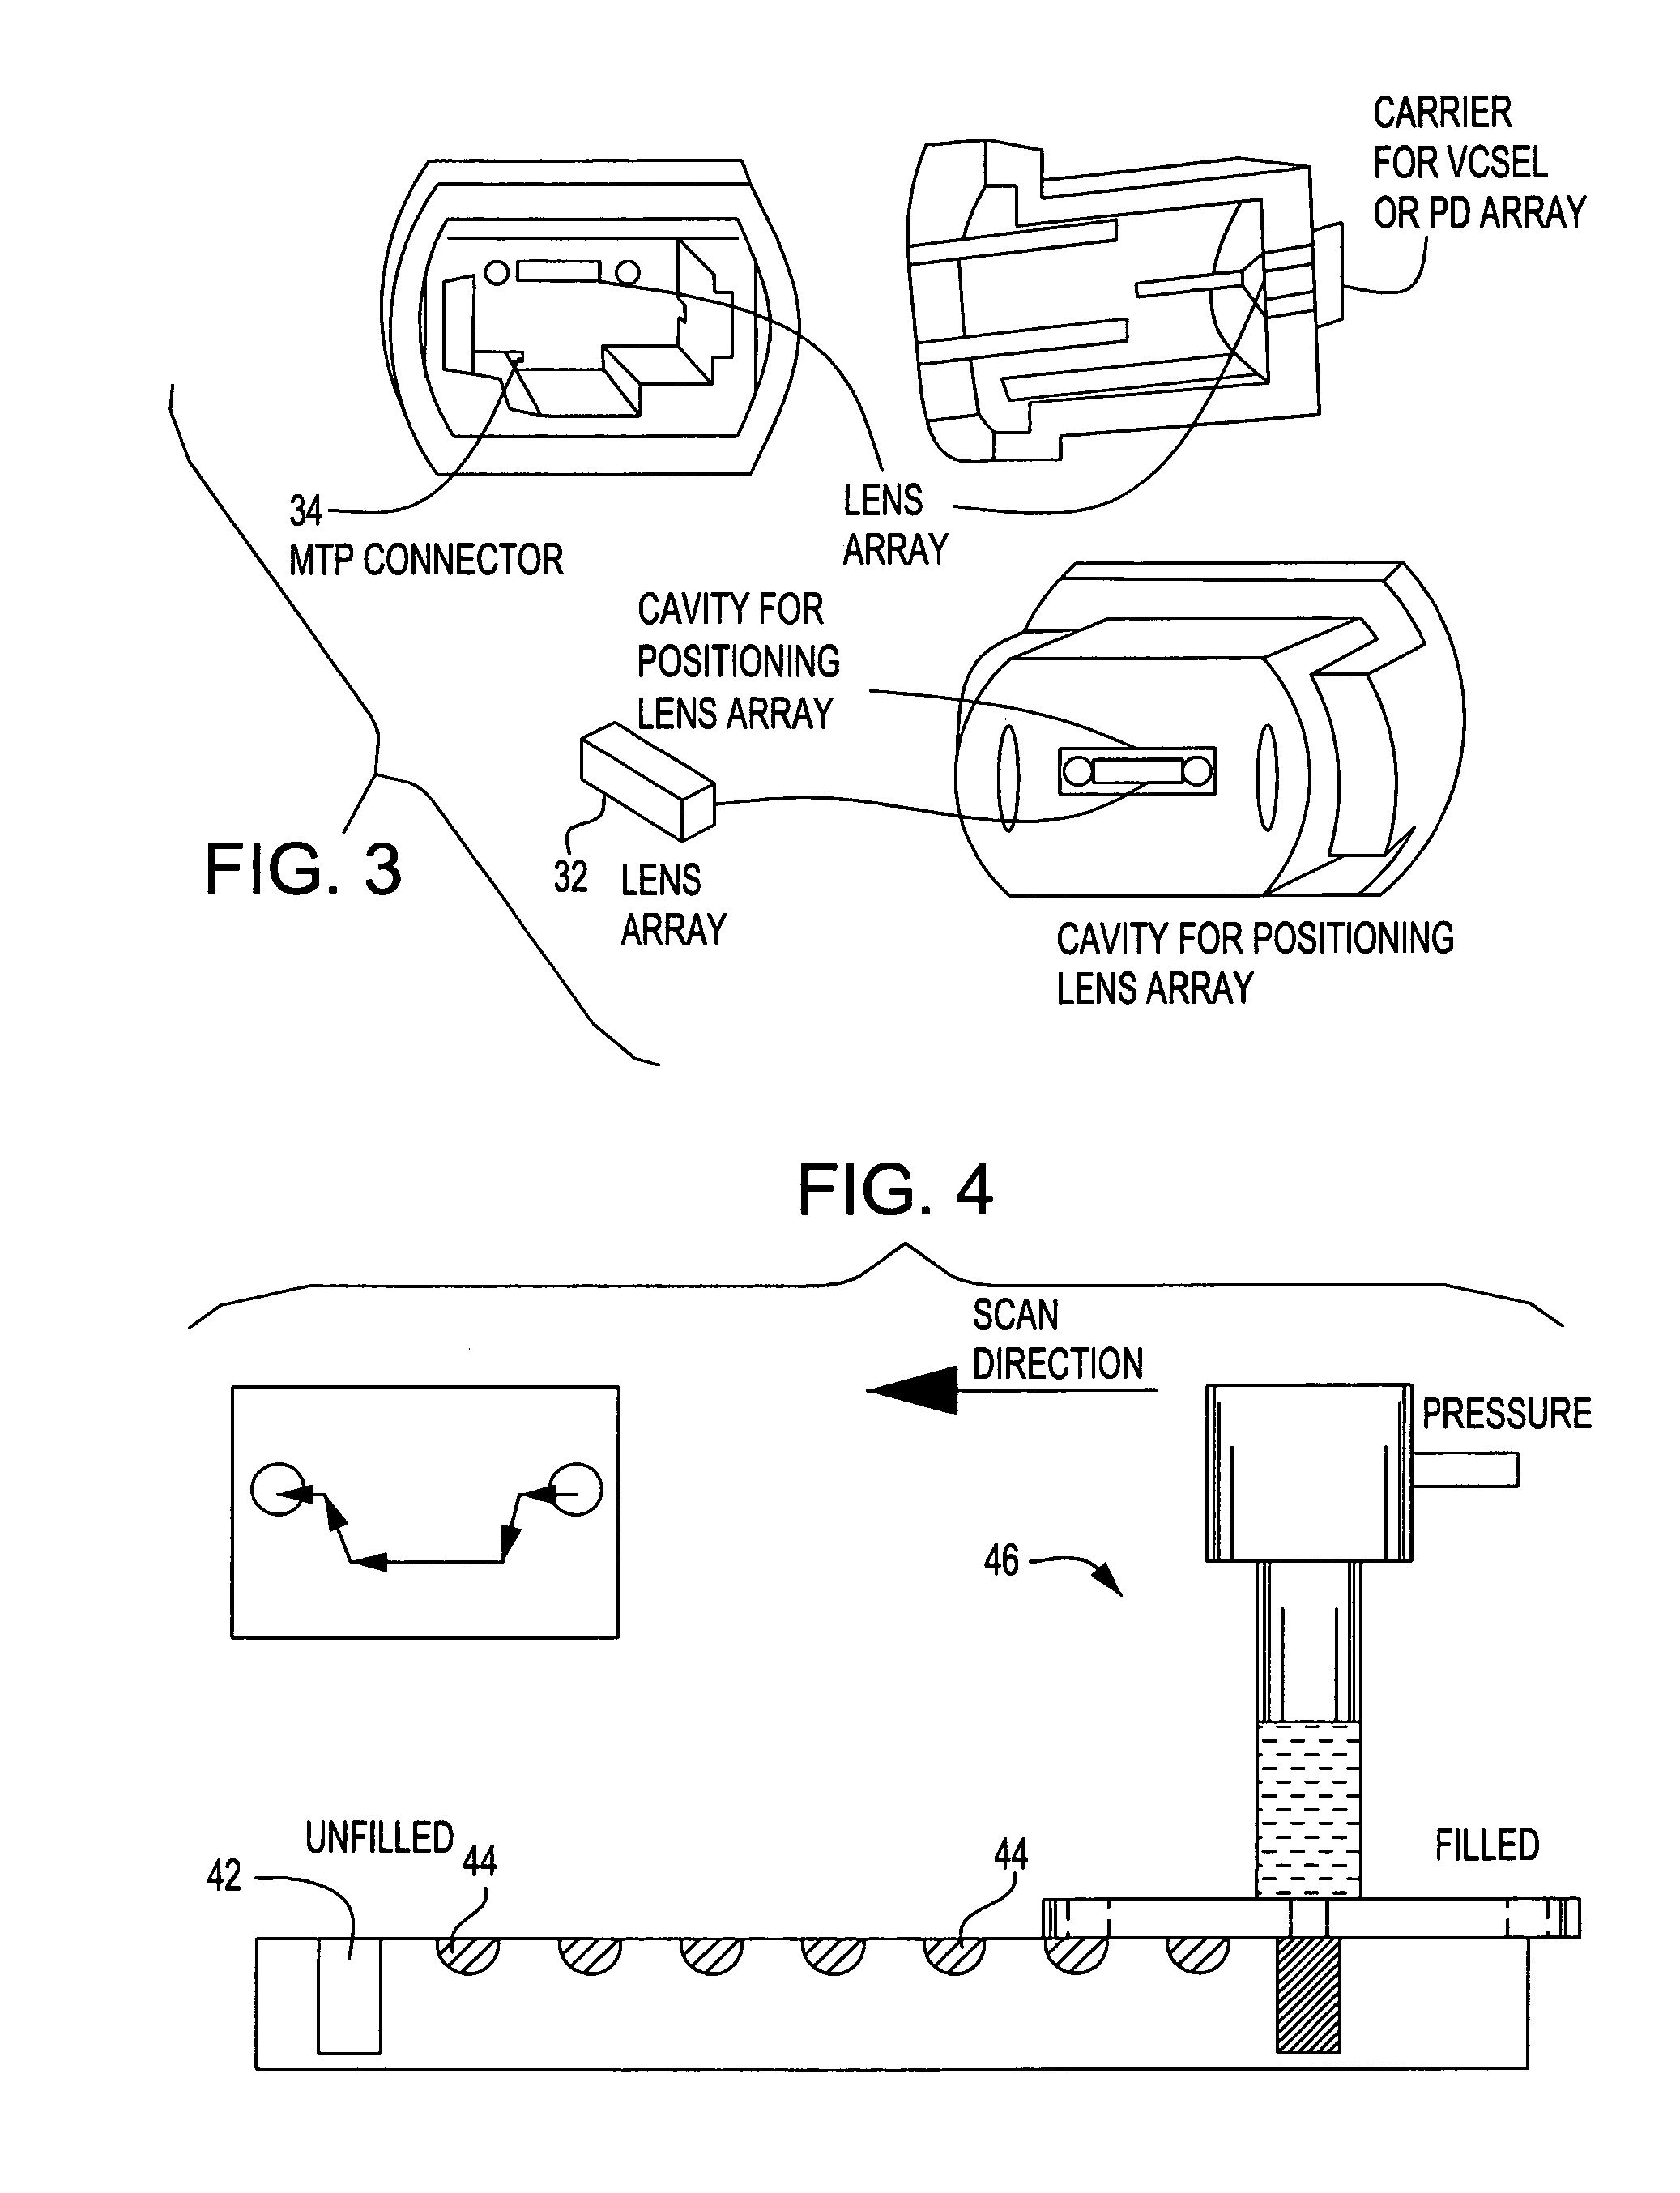 Hybrid optical/electronic structures fabricated by a common molding process